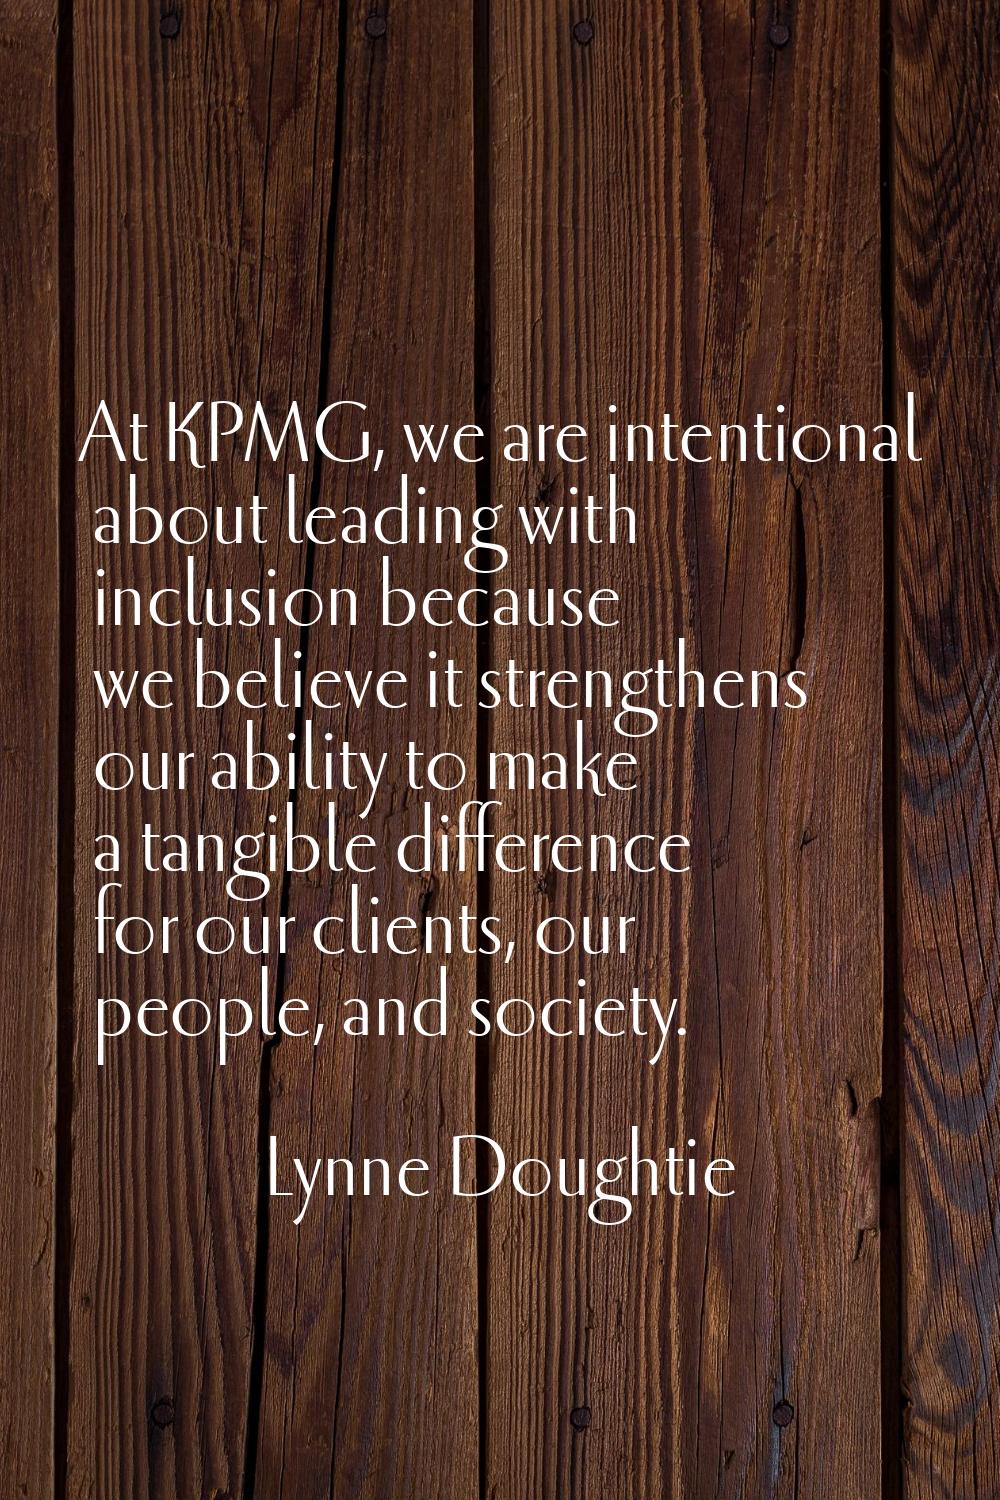 At KPMG, we are intentional about leading with inclusion because we believe it strengthens our abil